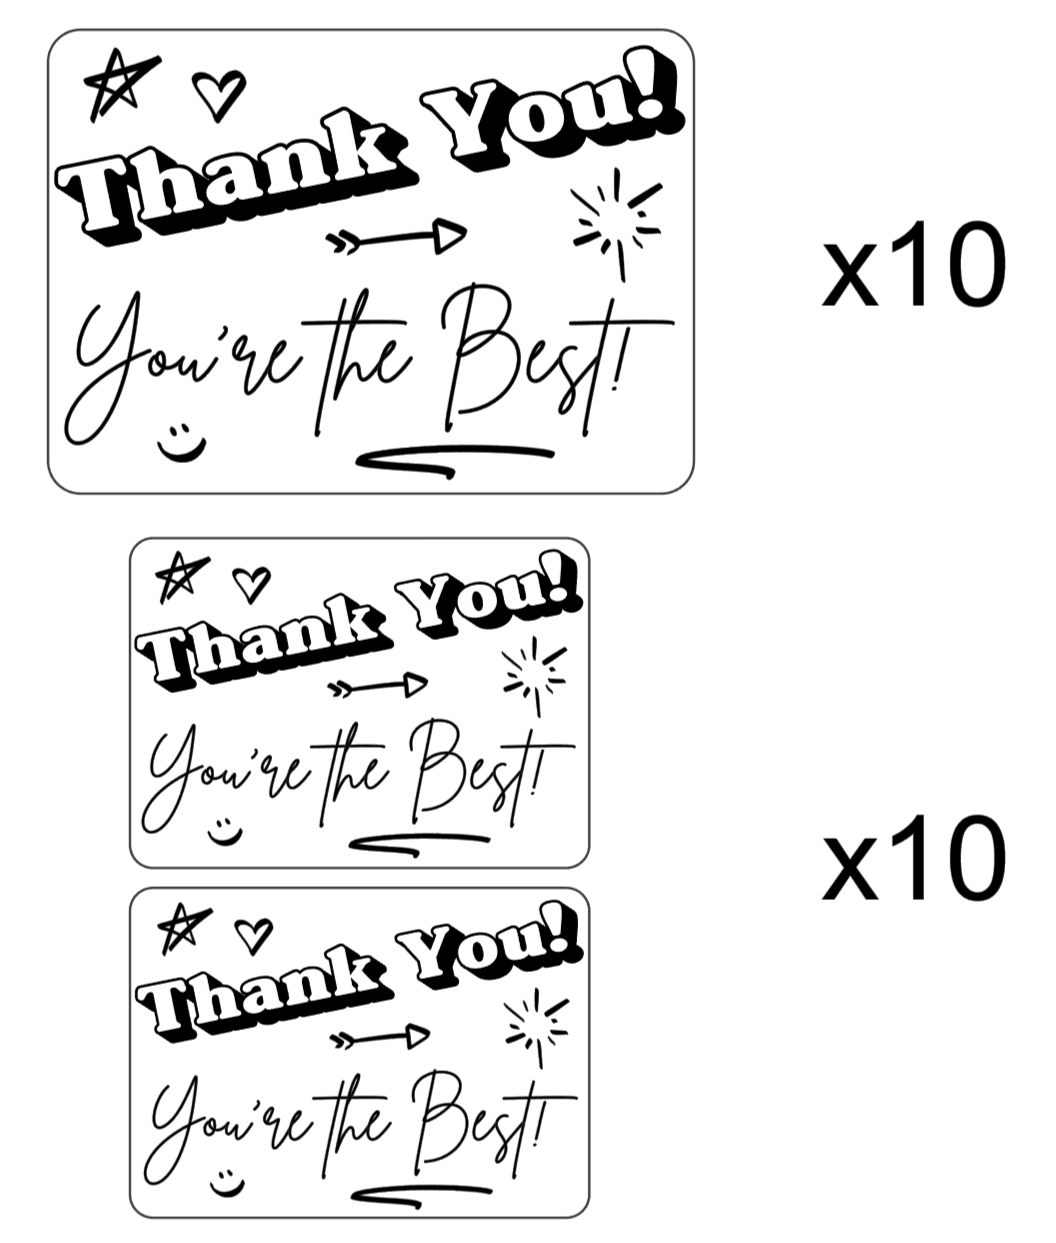 Sticker Set 20 Thermal Labels Thank you!